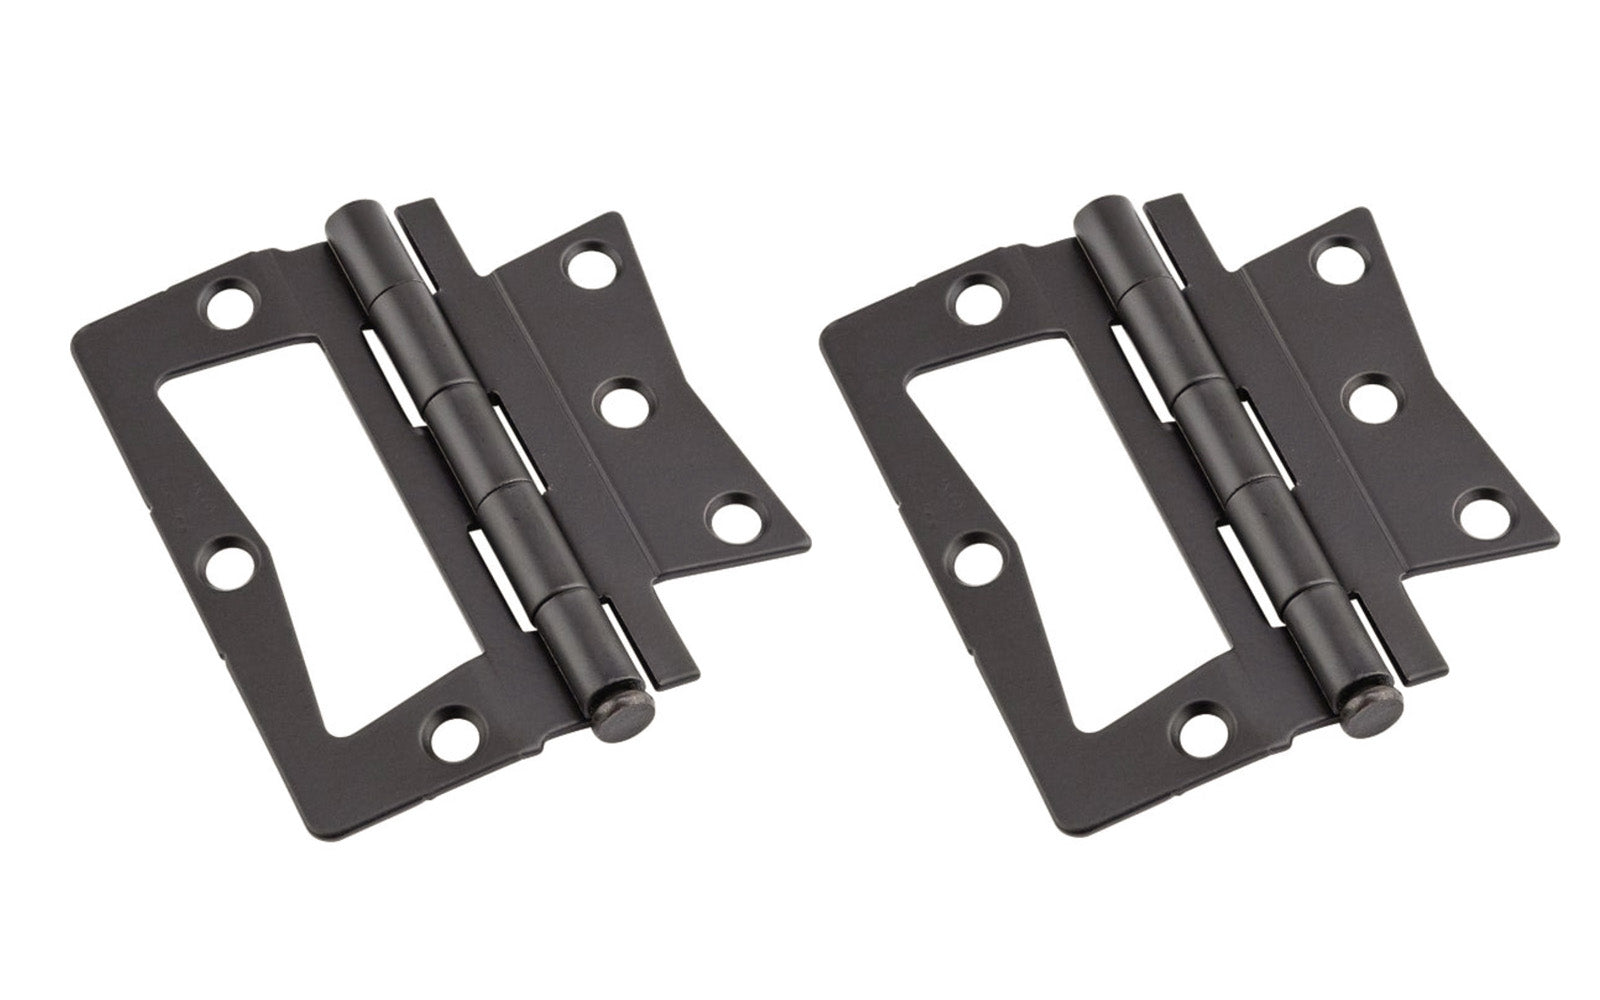 3-1/2" Oil Rubbed Bronze Surface Mount Hinges - 2 Pack. These non mortise hinges are designed for use on bi-fold doors. Non-removable tight, non-rising pin. Surface mount, mortising is not required. Sold as 2 hinges in pack. National Hardware Model No. N830-438. 886780020410